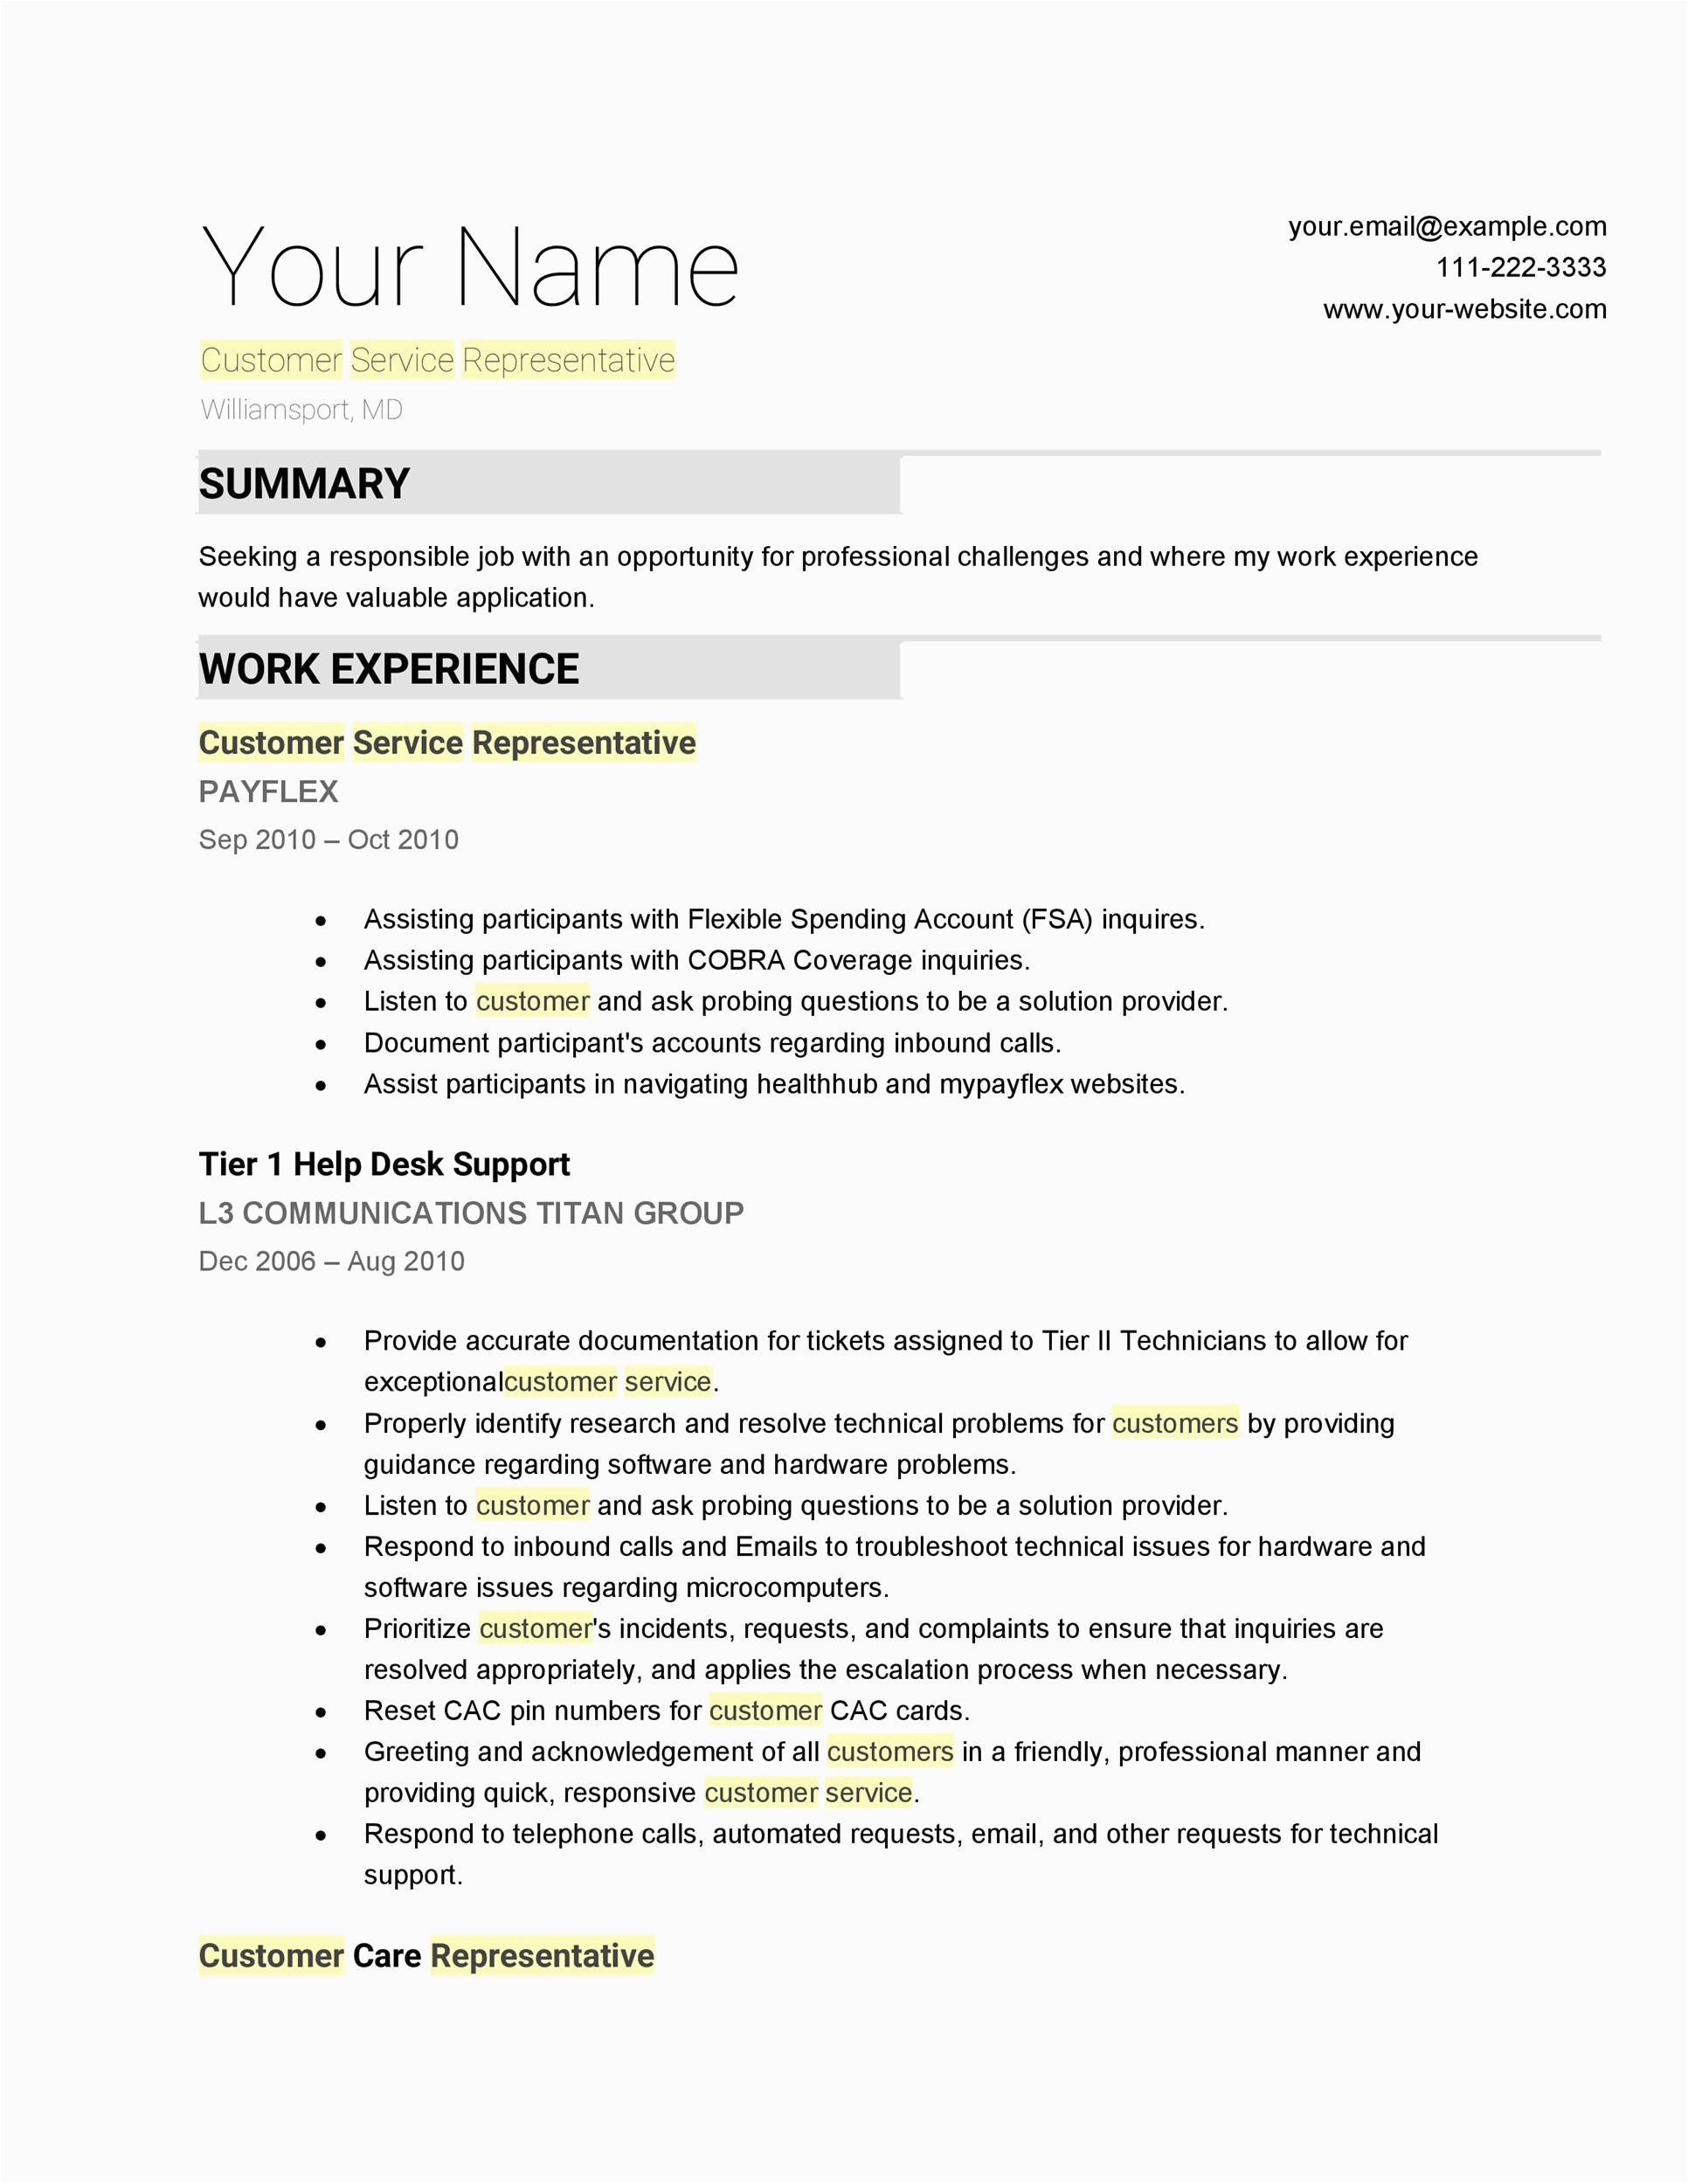 Sample Resumes for Jobs In Customer Service 30 Customer Service Resume Examples Templatelab